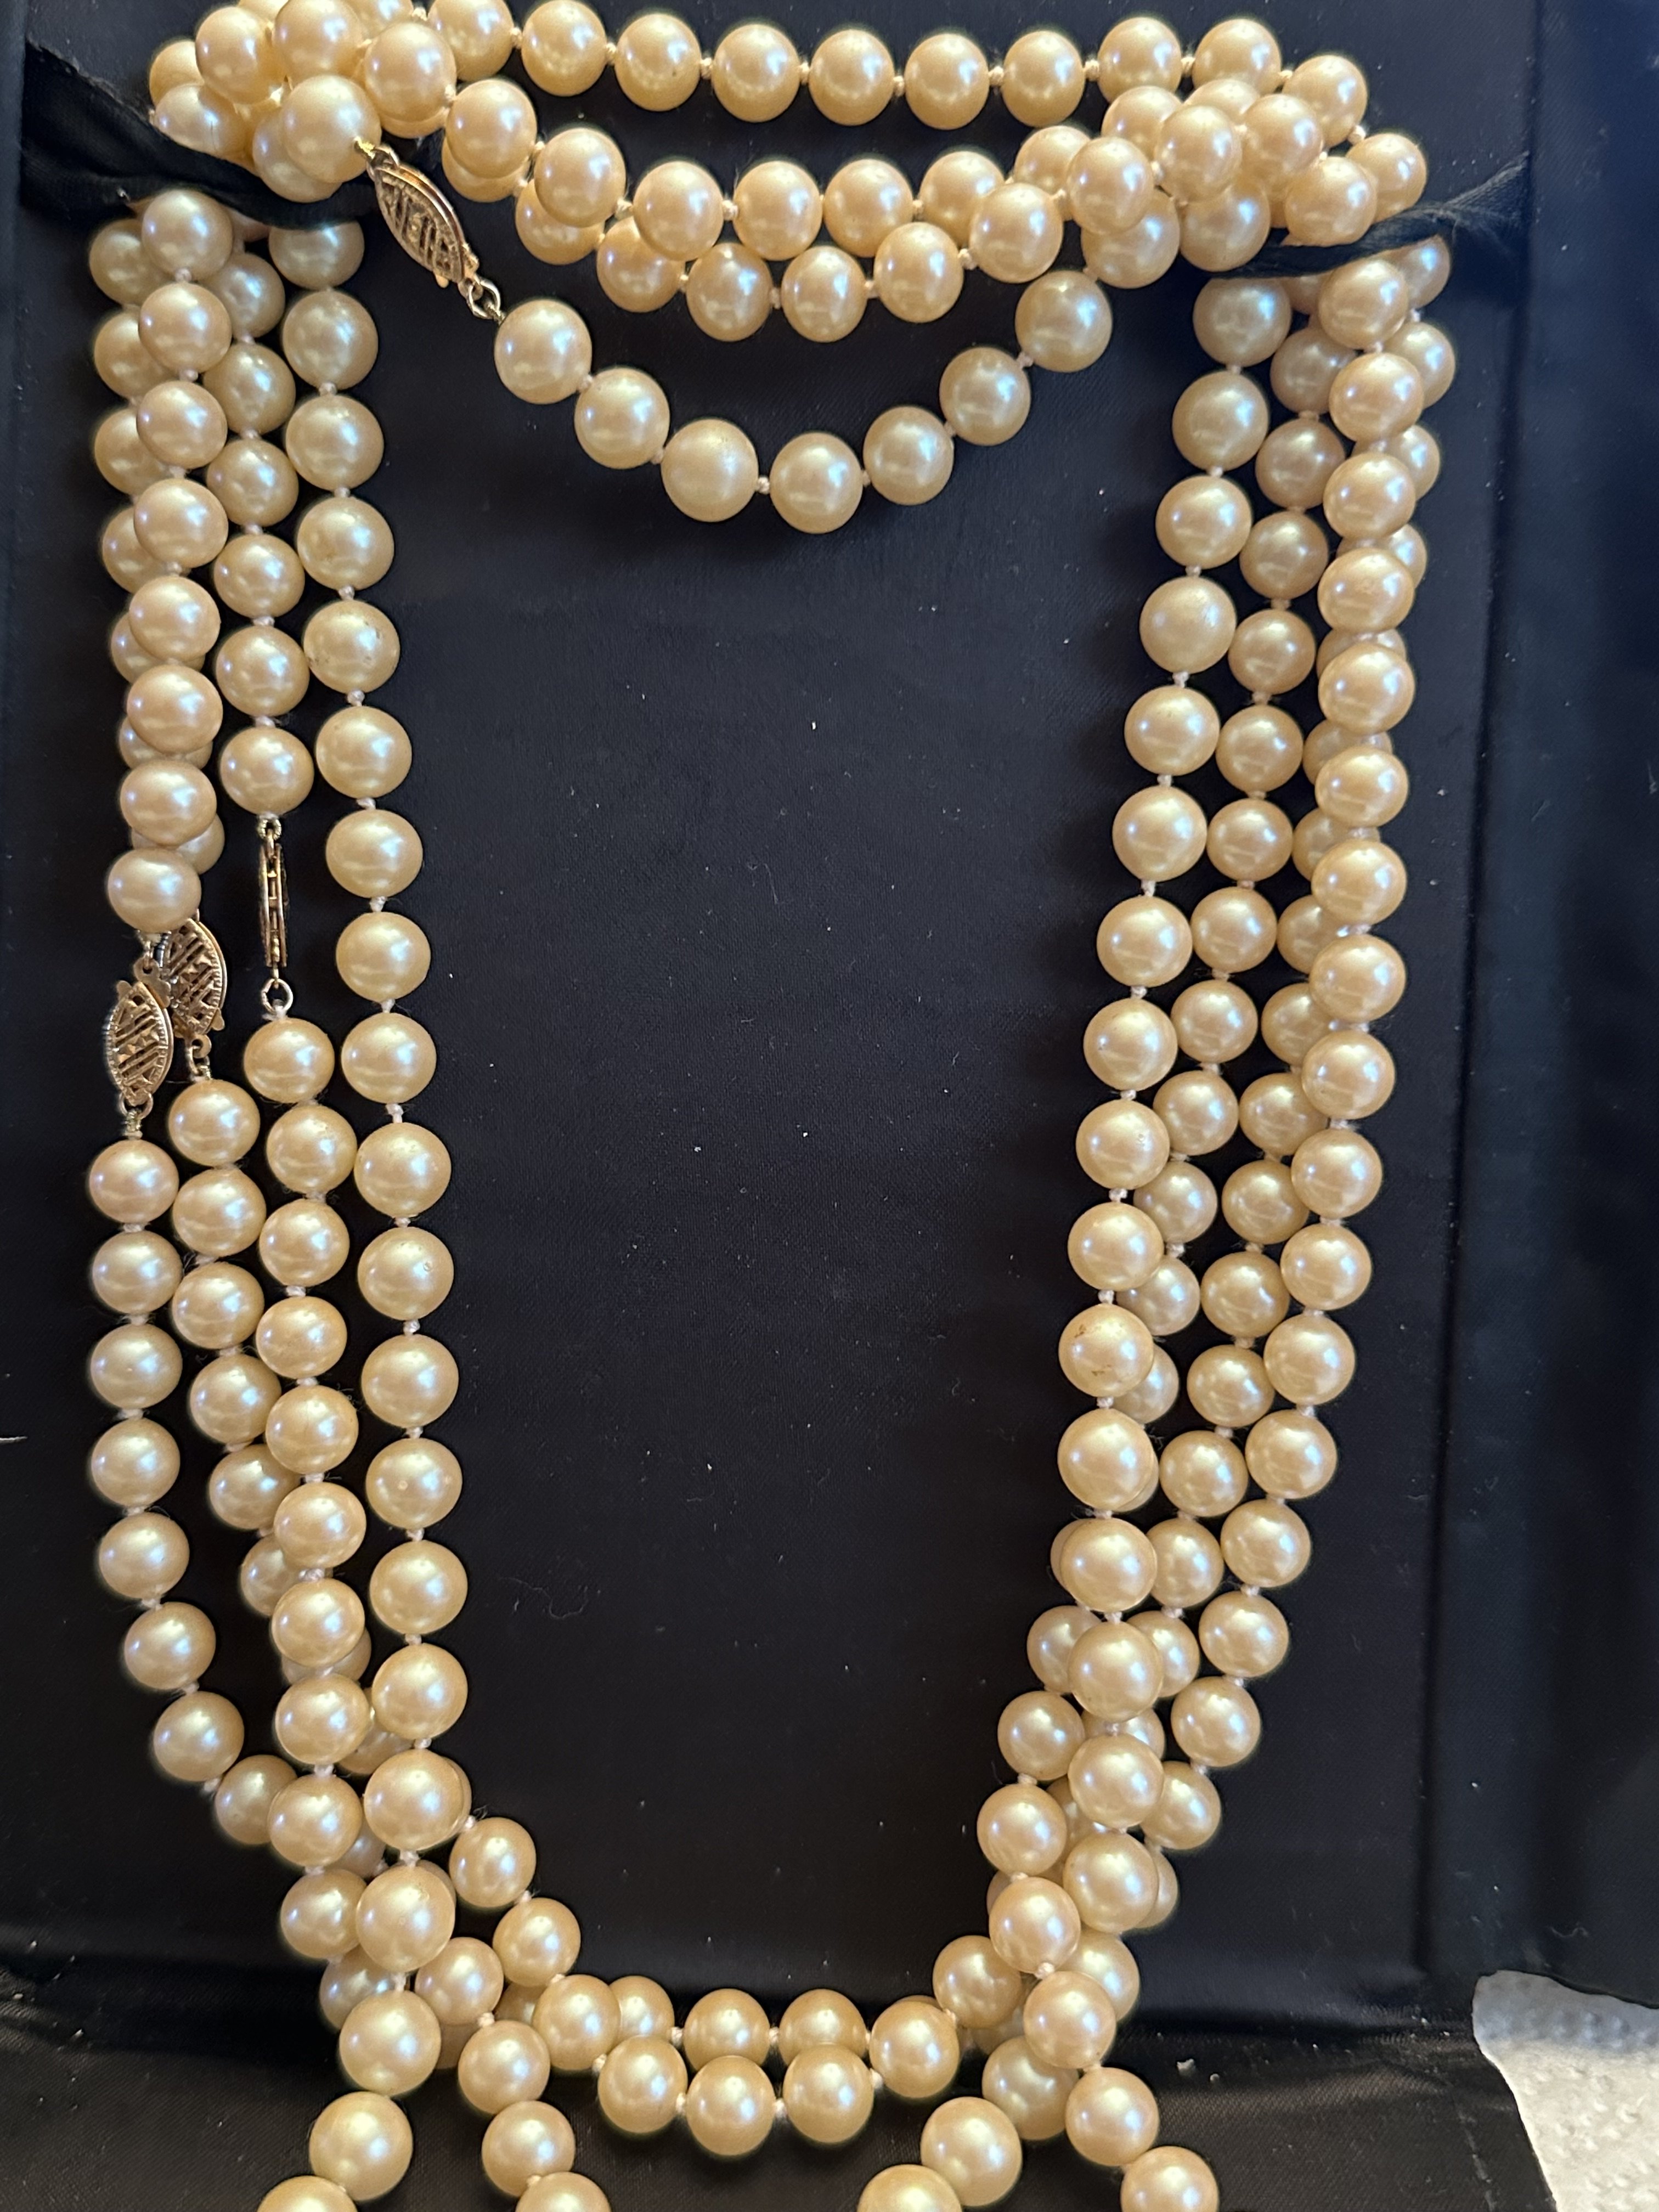 What Kind of Pearls do I have? ID help appreciated